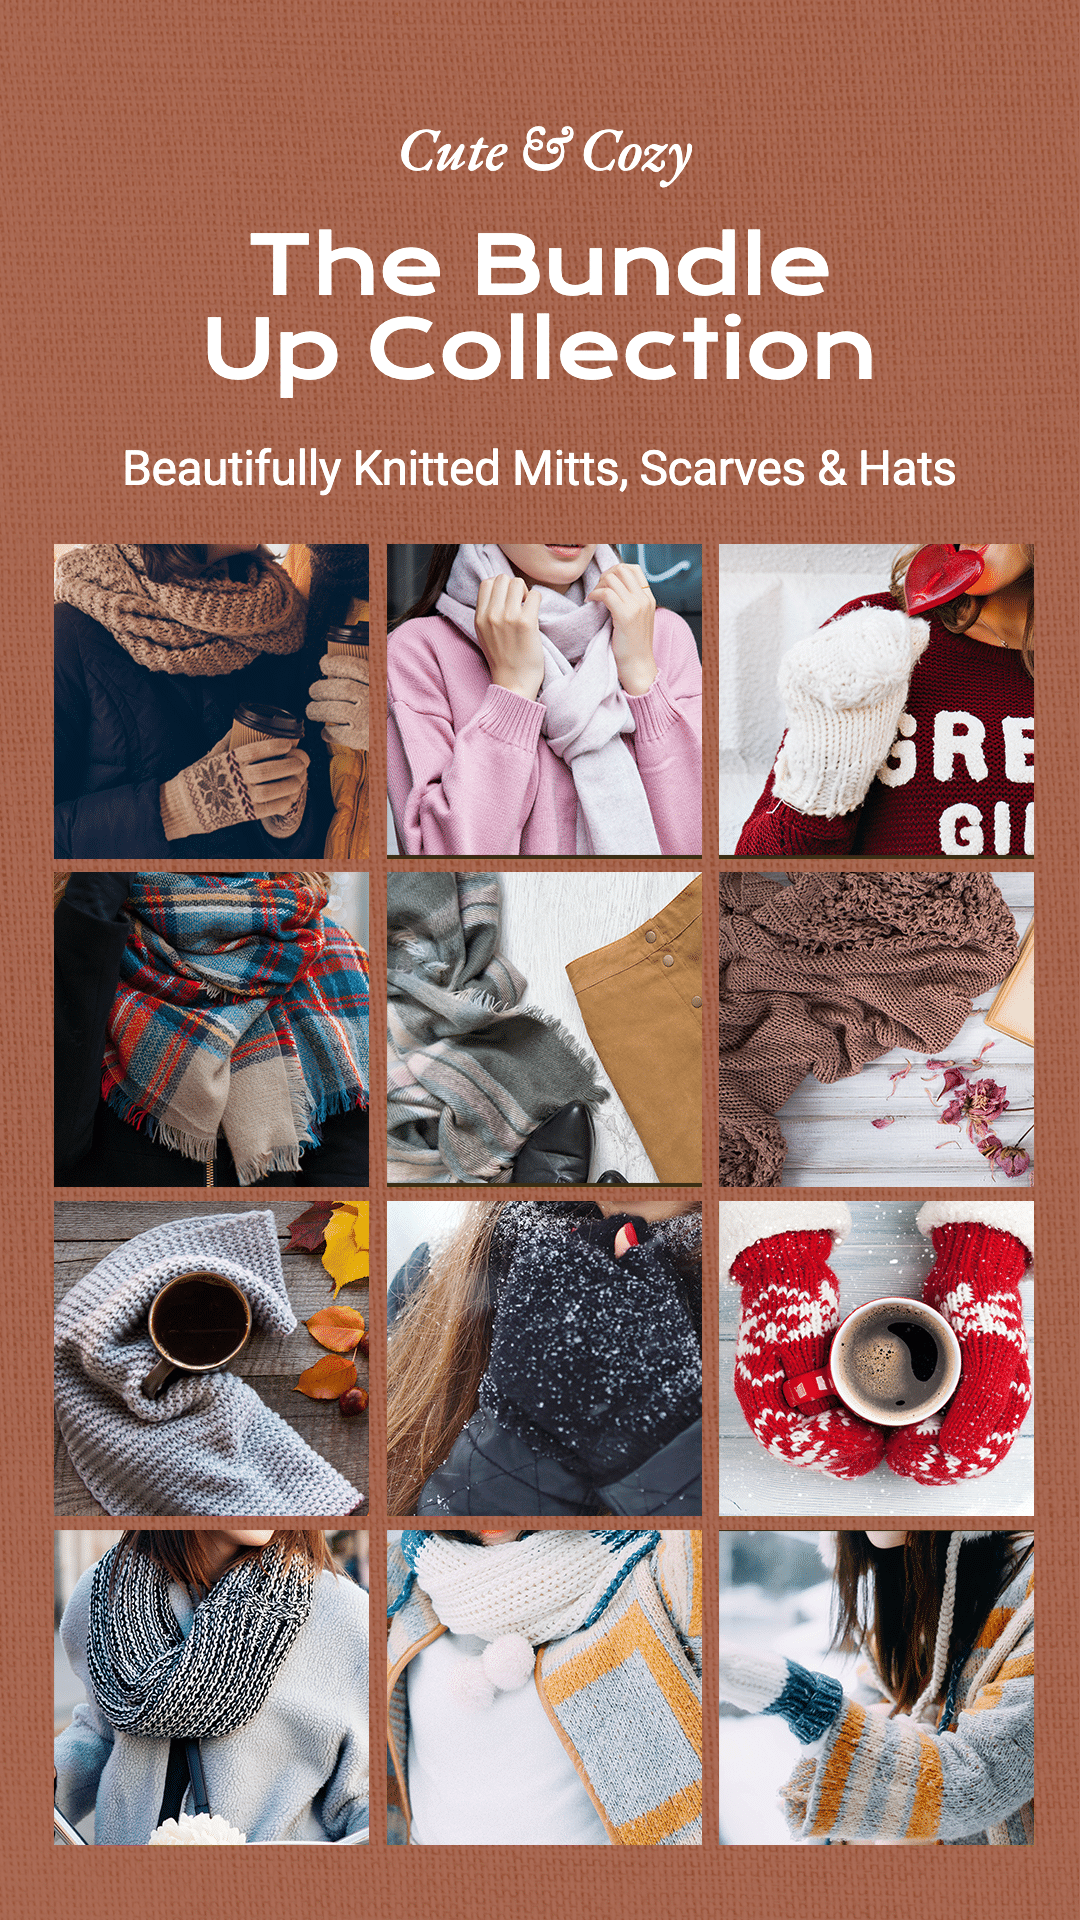 Winter Knitted Mitts Scarves Hats Collection 